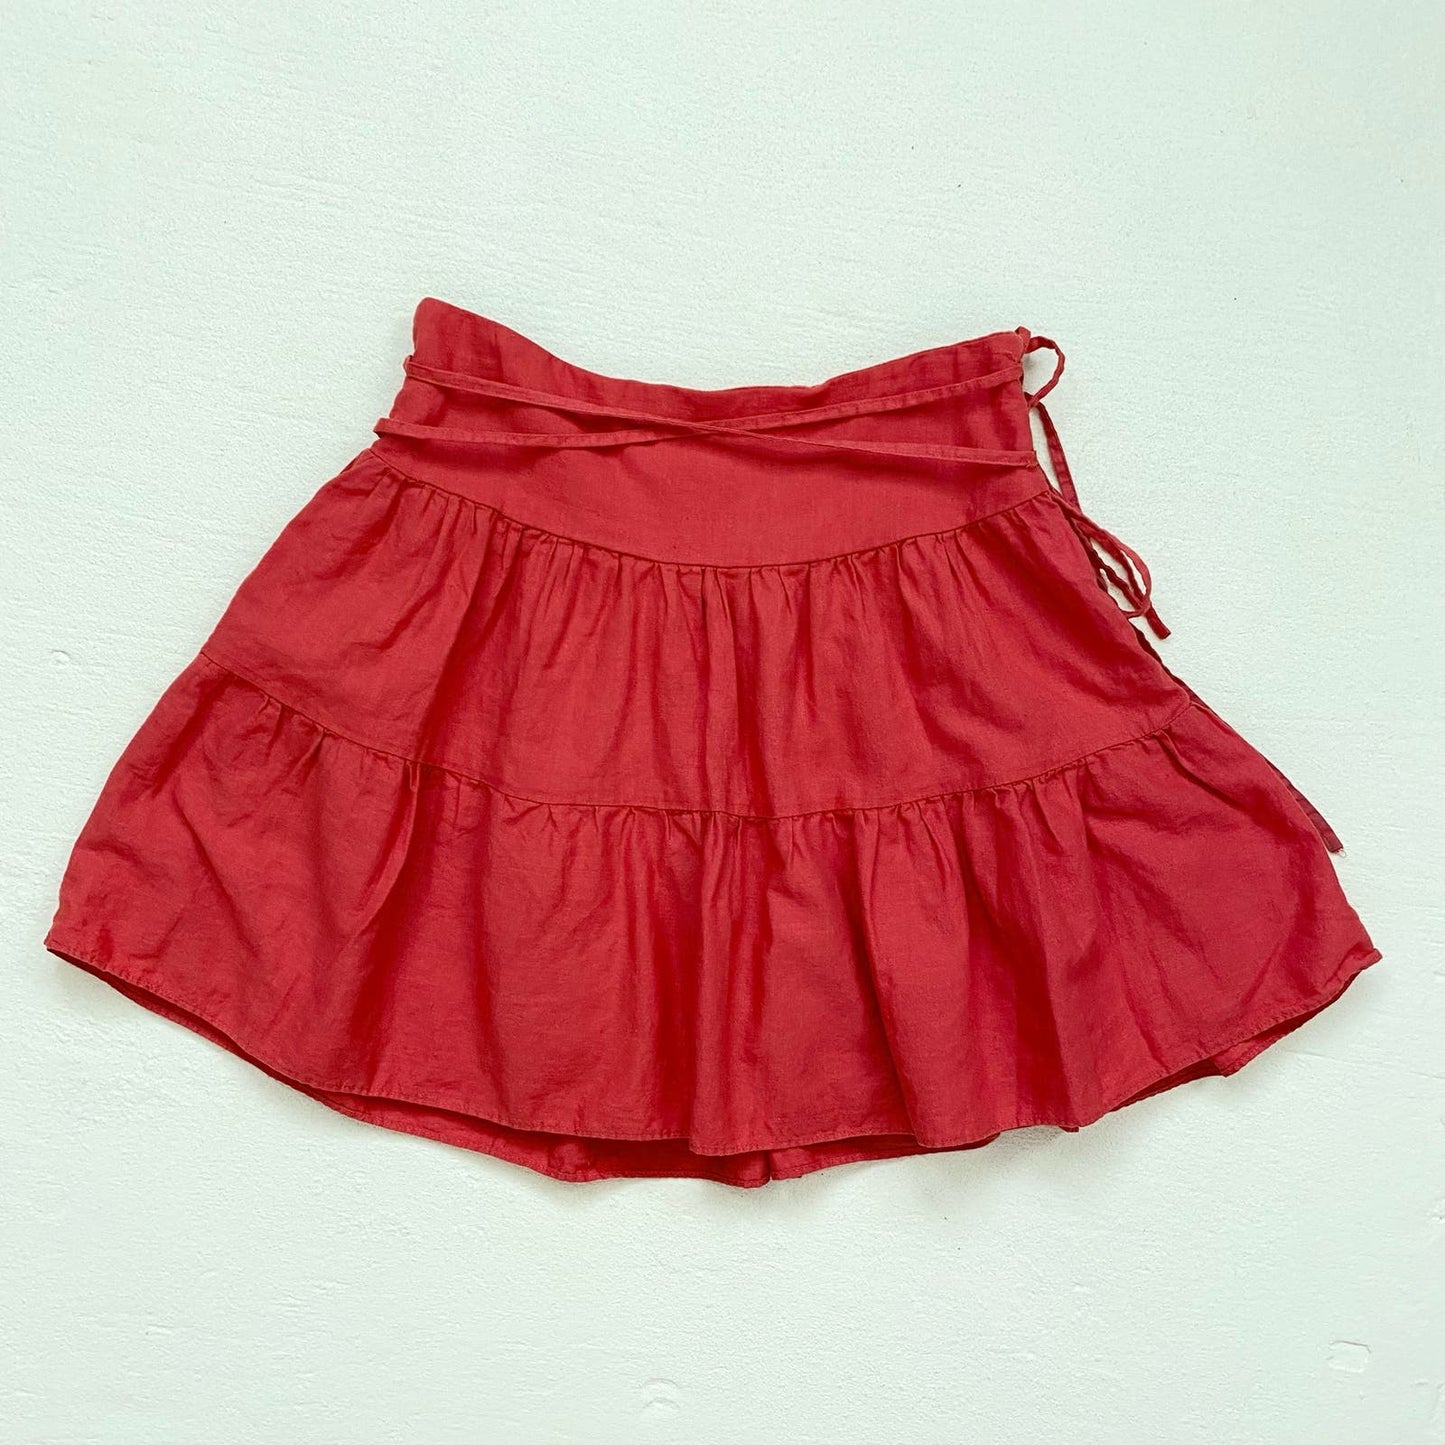 Secondhand Heart Moon Star Coral Tiered Linen Cotton Mini Skirt, Size 0